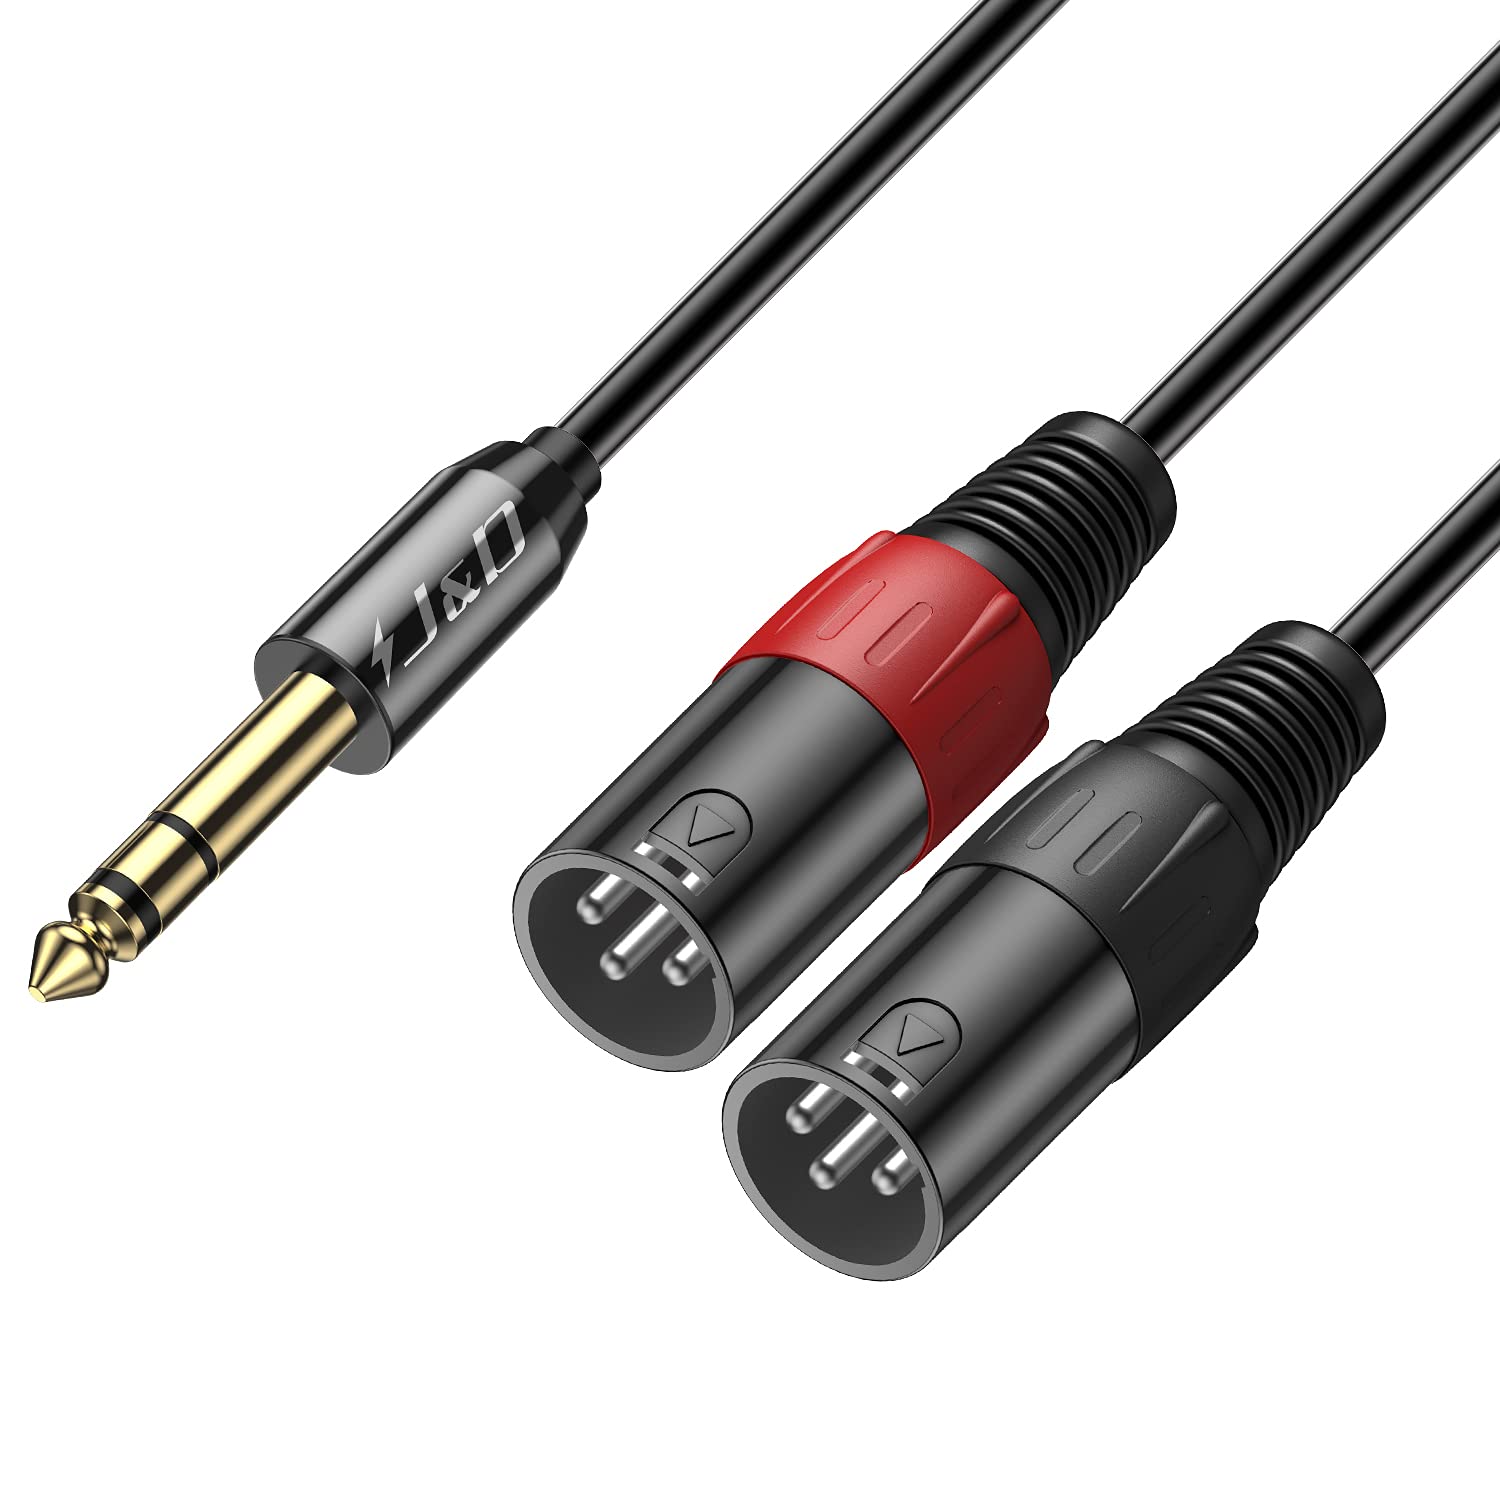 2 XLR Male to 6.35 mm 1/4 inch TRS Male Unbalanced Stereo Audio Cable